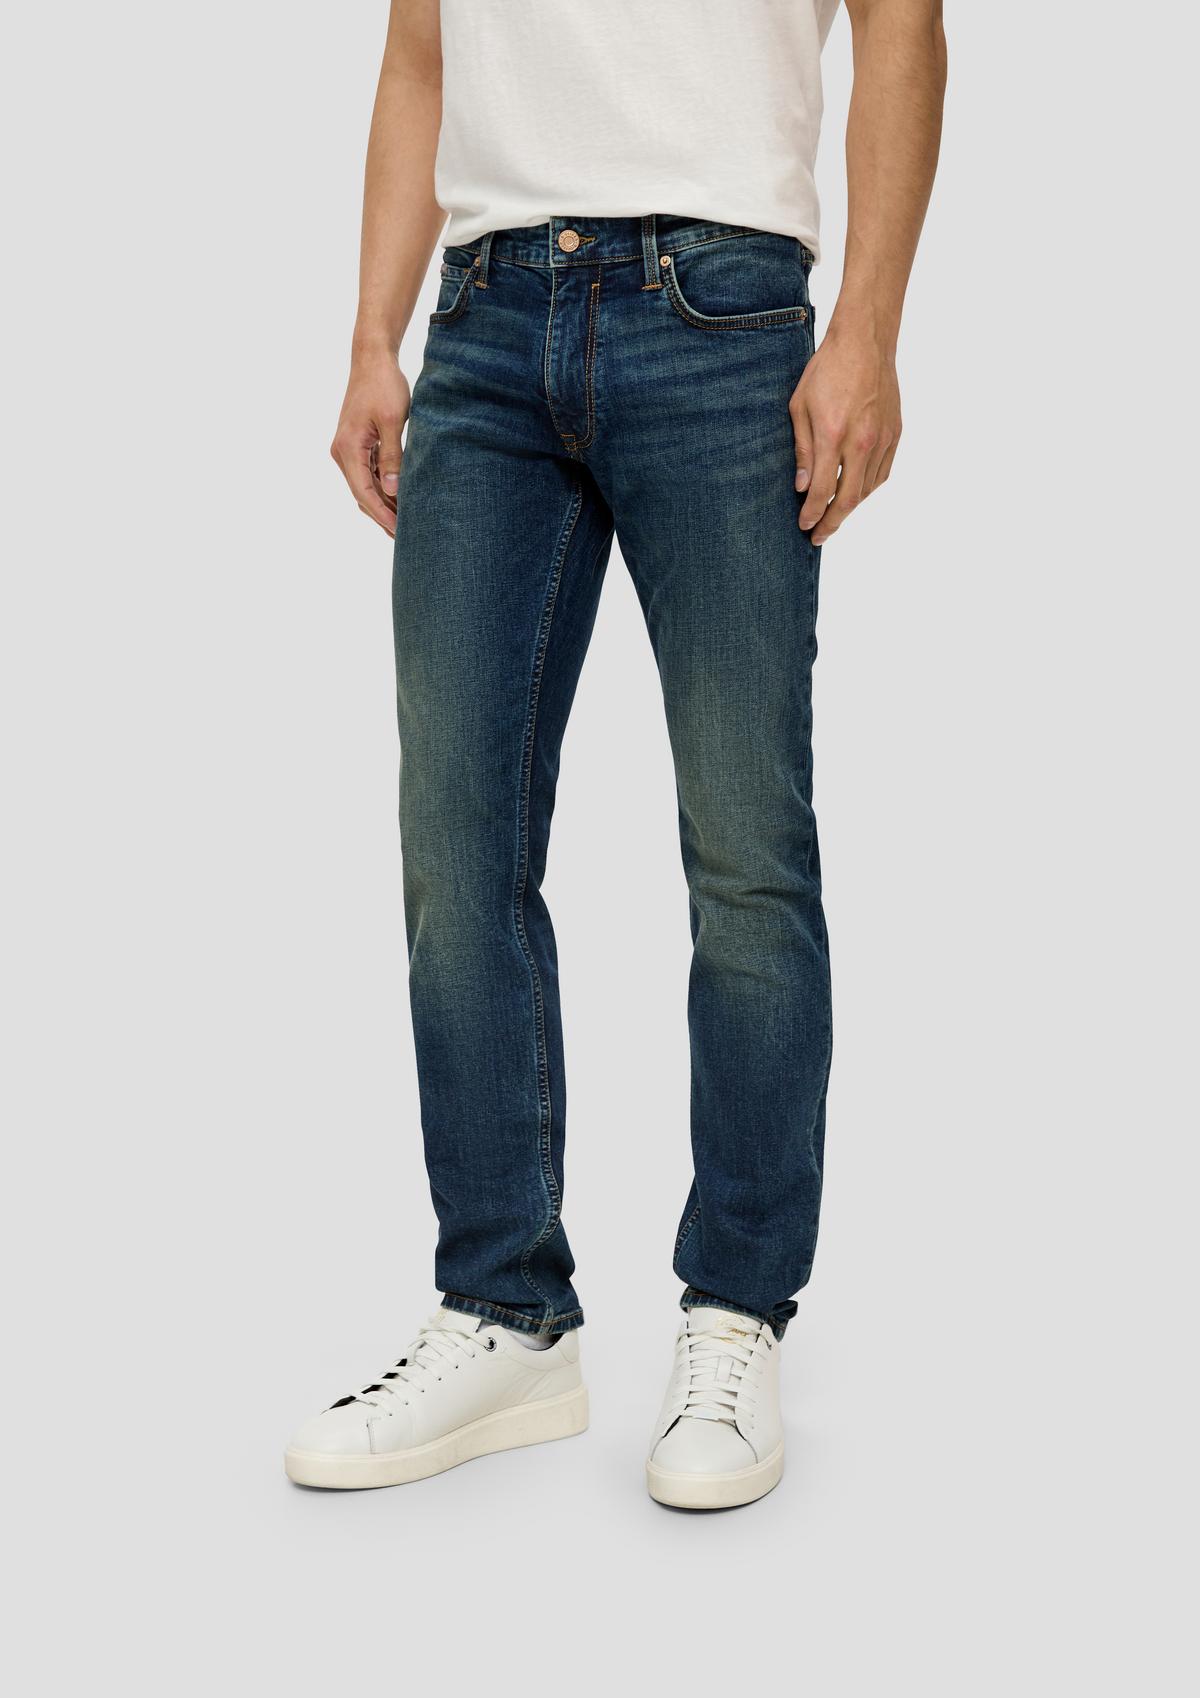 s.Oliver Keith jeans / slim fit / mid rise / straight leg